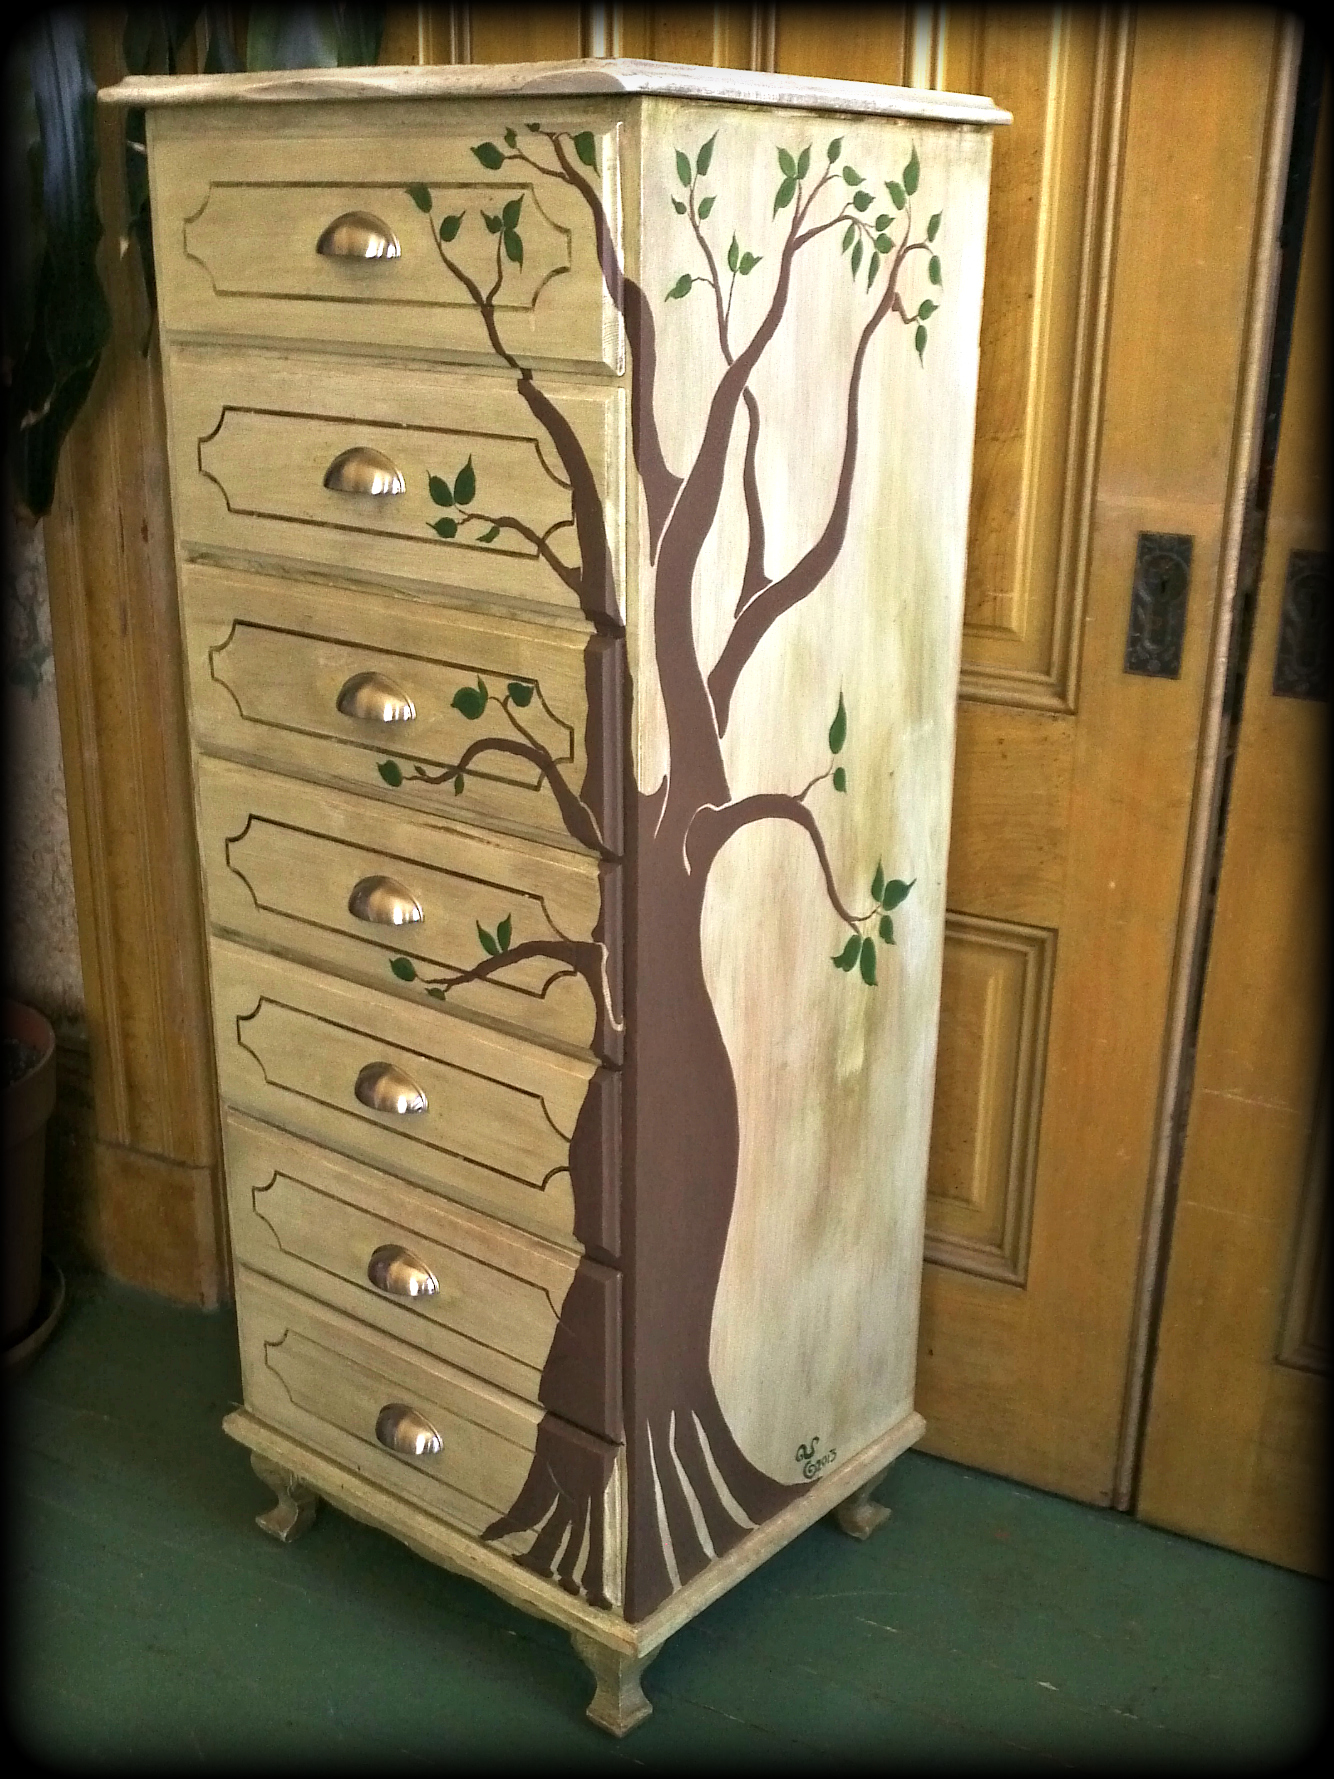 Dresser Furniture Made Lingerie Dresser Furniture With Rustic Made From Wooden Material And Unique Picture Decor Furniture  Pretty Lingerie Dresser For Keeping Women’s Secret 